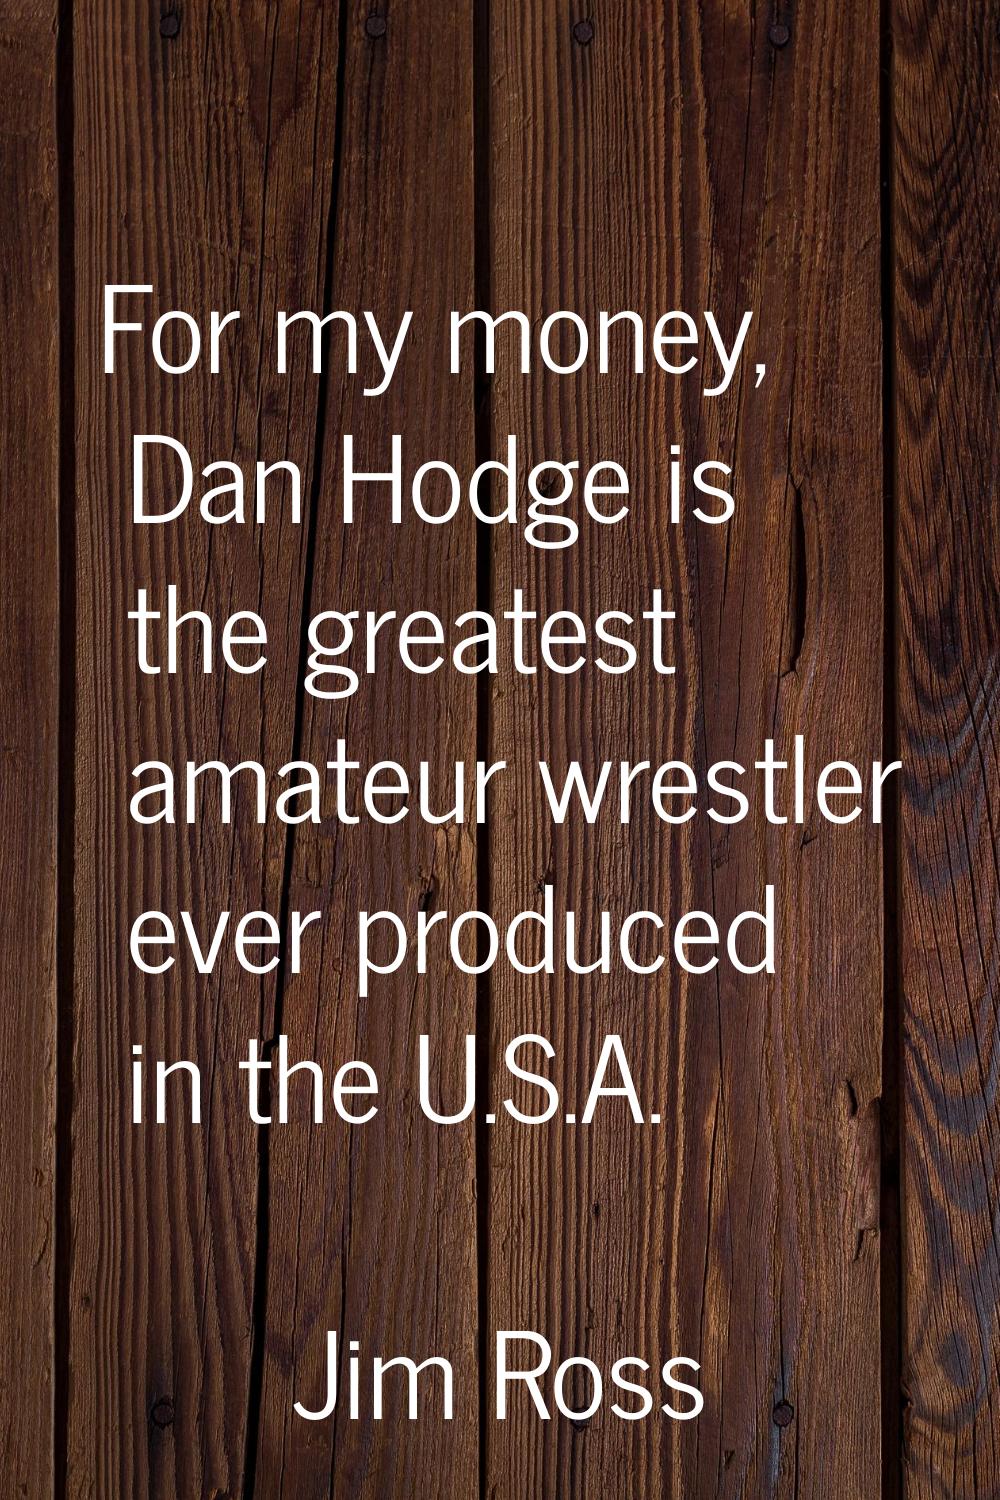 For my money, Dan Hodge is the greatest amateur wrestler ever produced in the U.S.A.